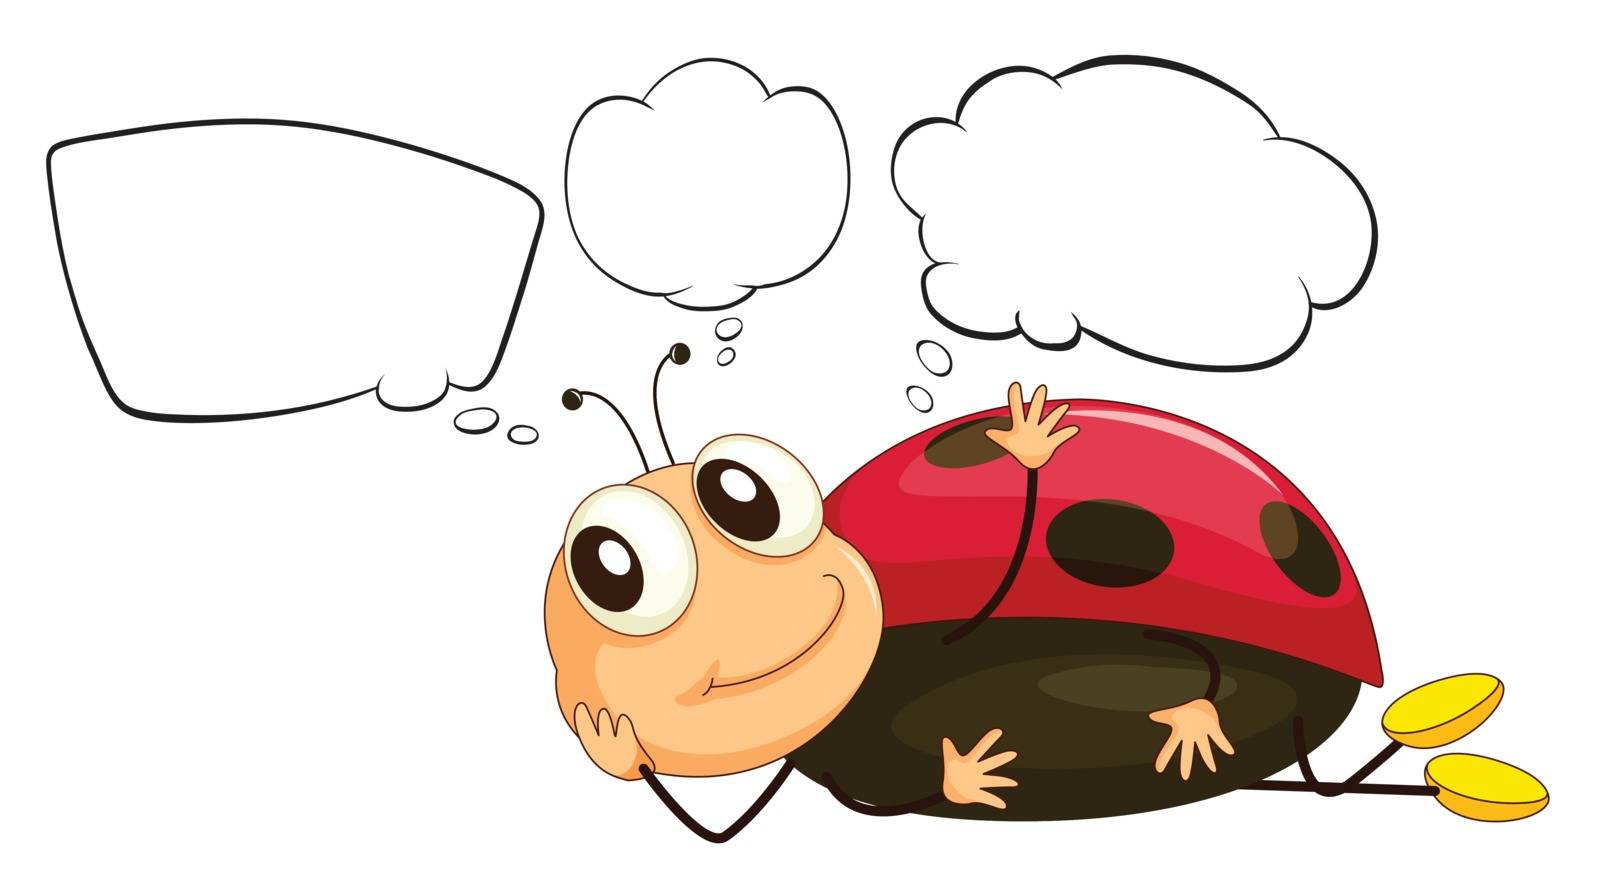 Illustration of a bug with empty thoughts on a white background